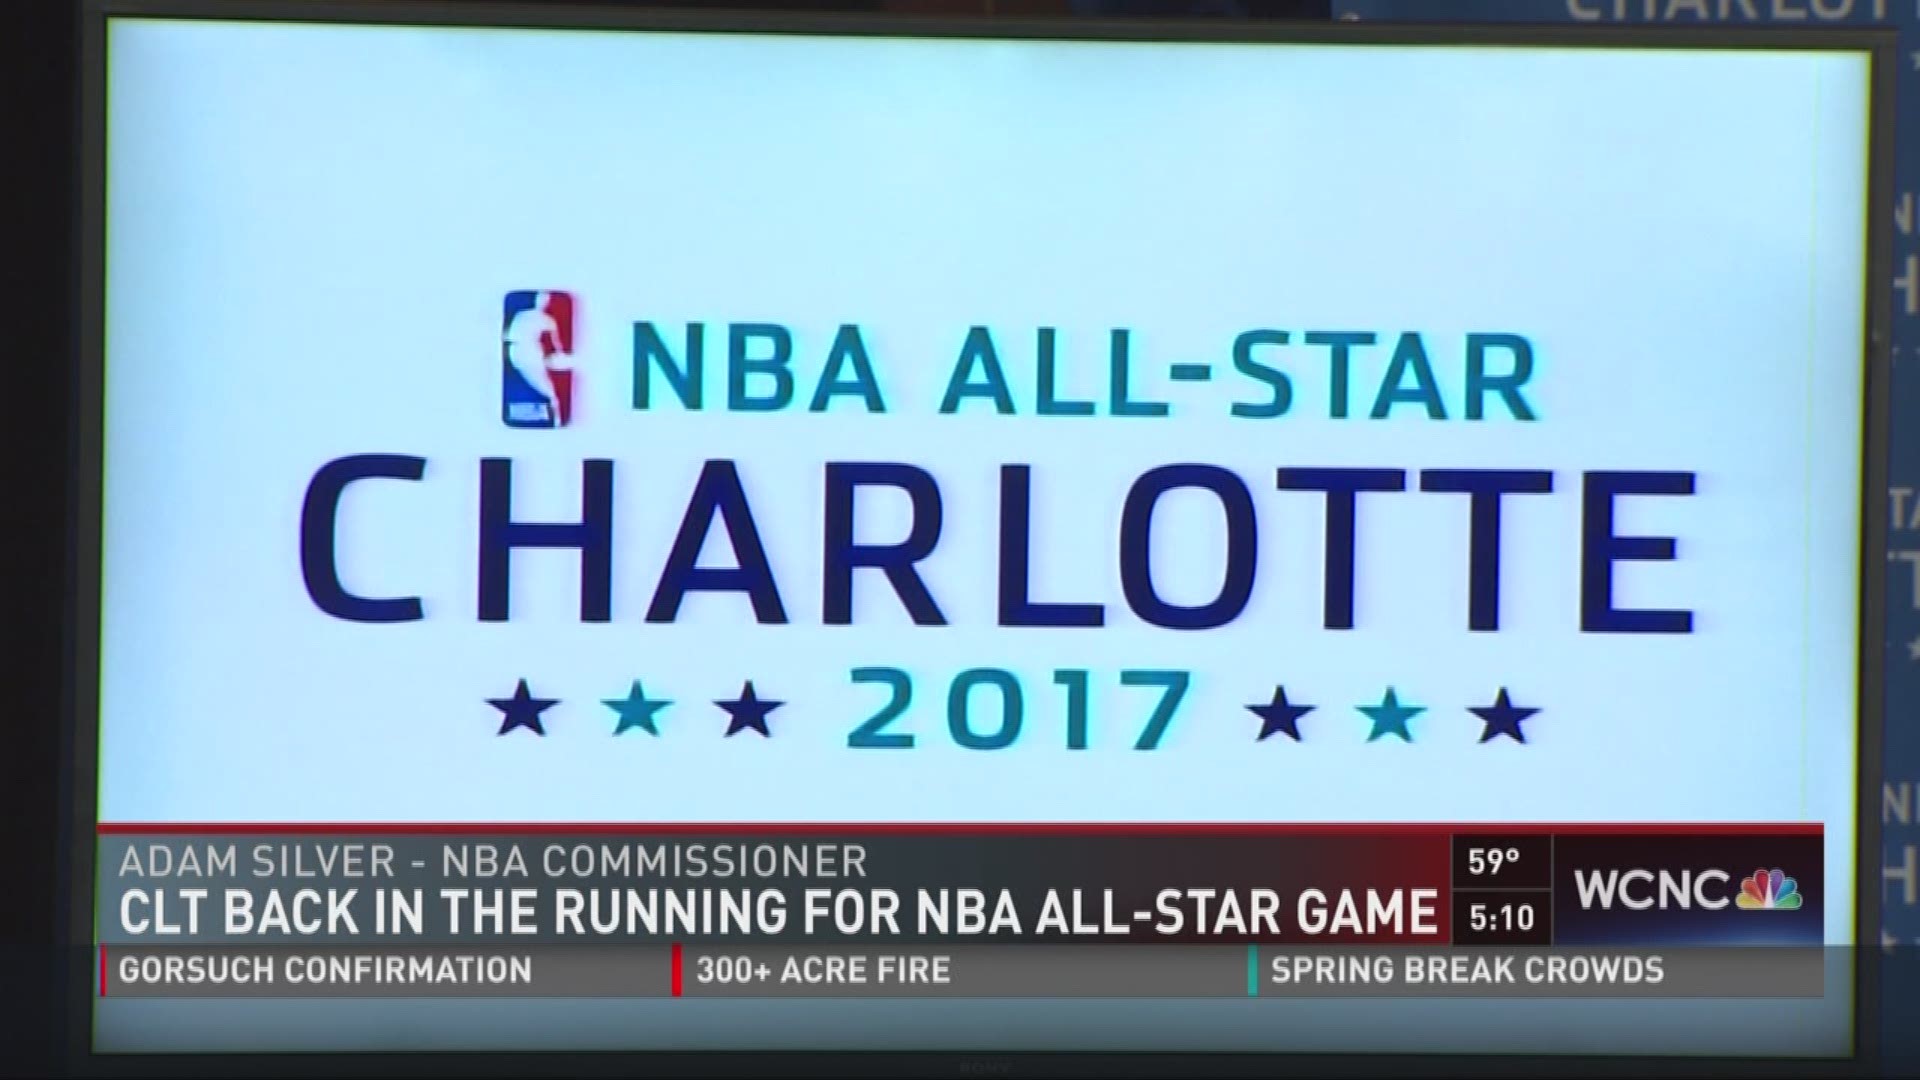 Charlotte is back in the running for an NBA All-Star Game.